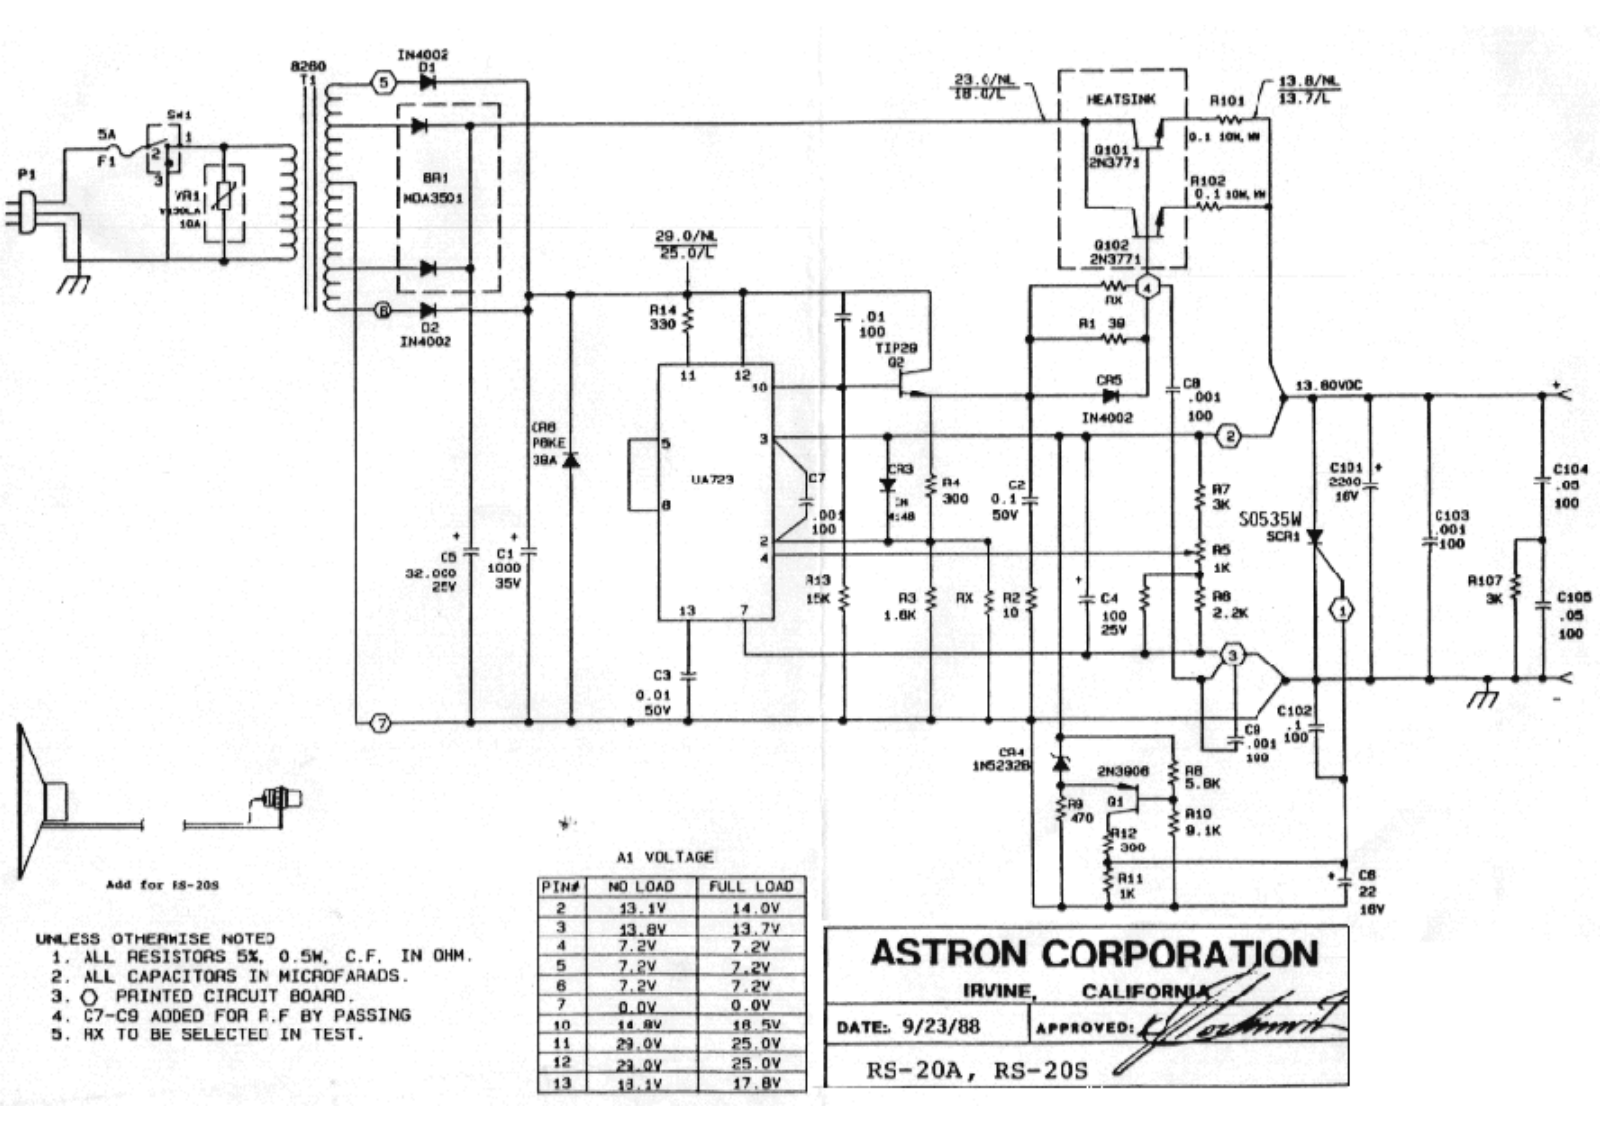 Astron rs 20a, rs 20s schematic